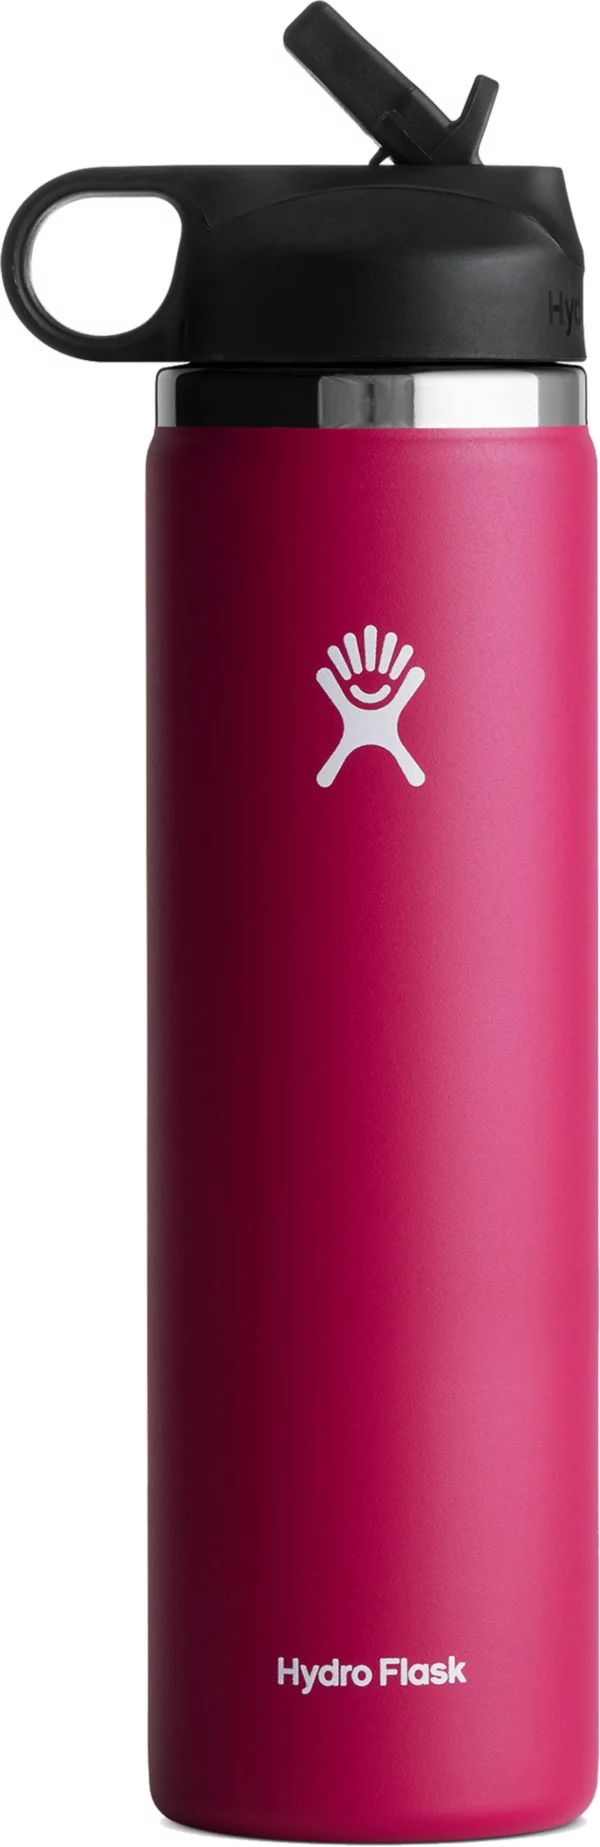 Hydro Flask 24 oz. Wide Mouth Bottle with Straw Lid | Dick's Sporting Goods